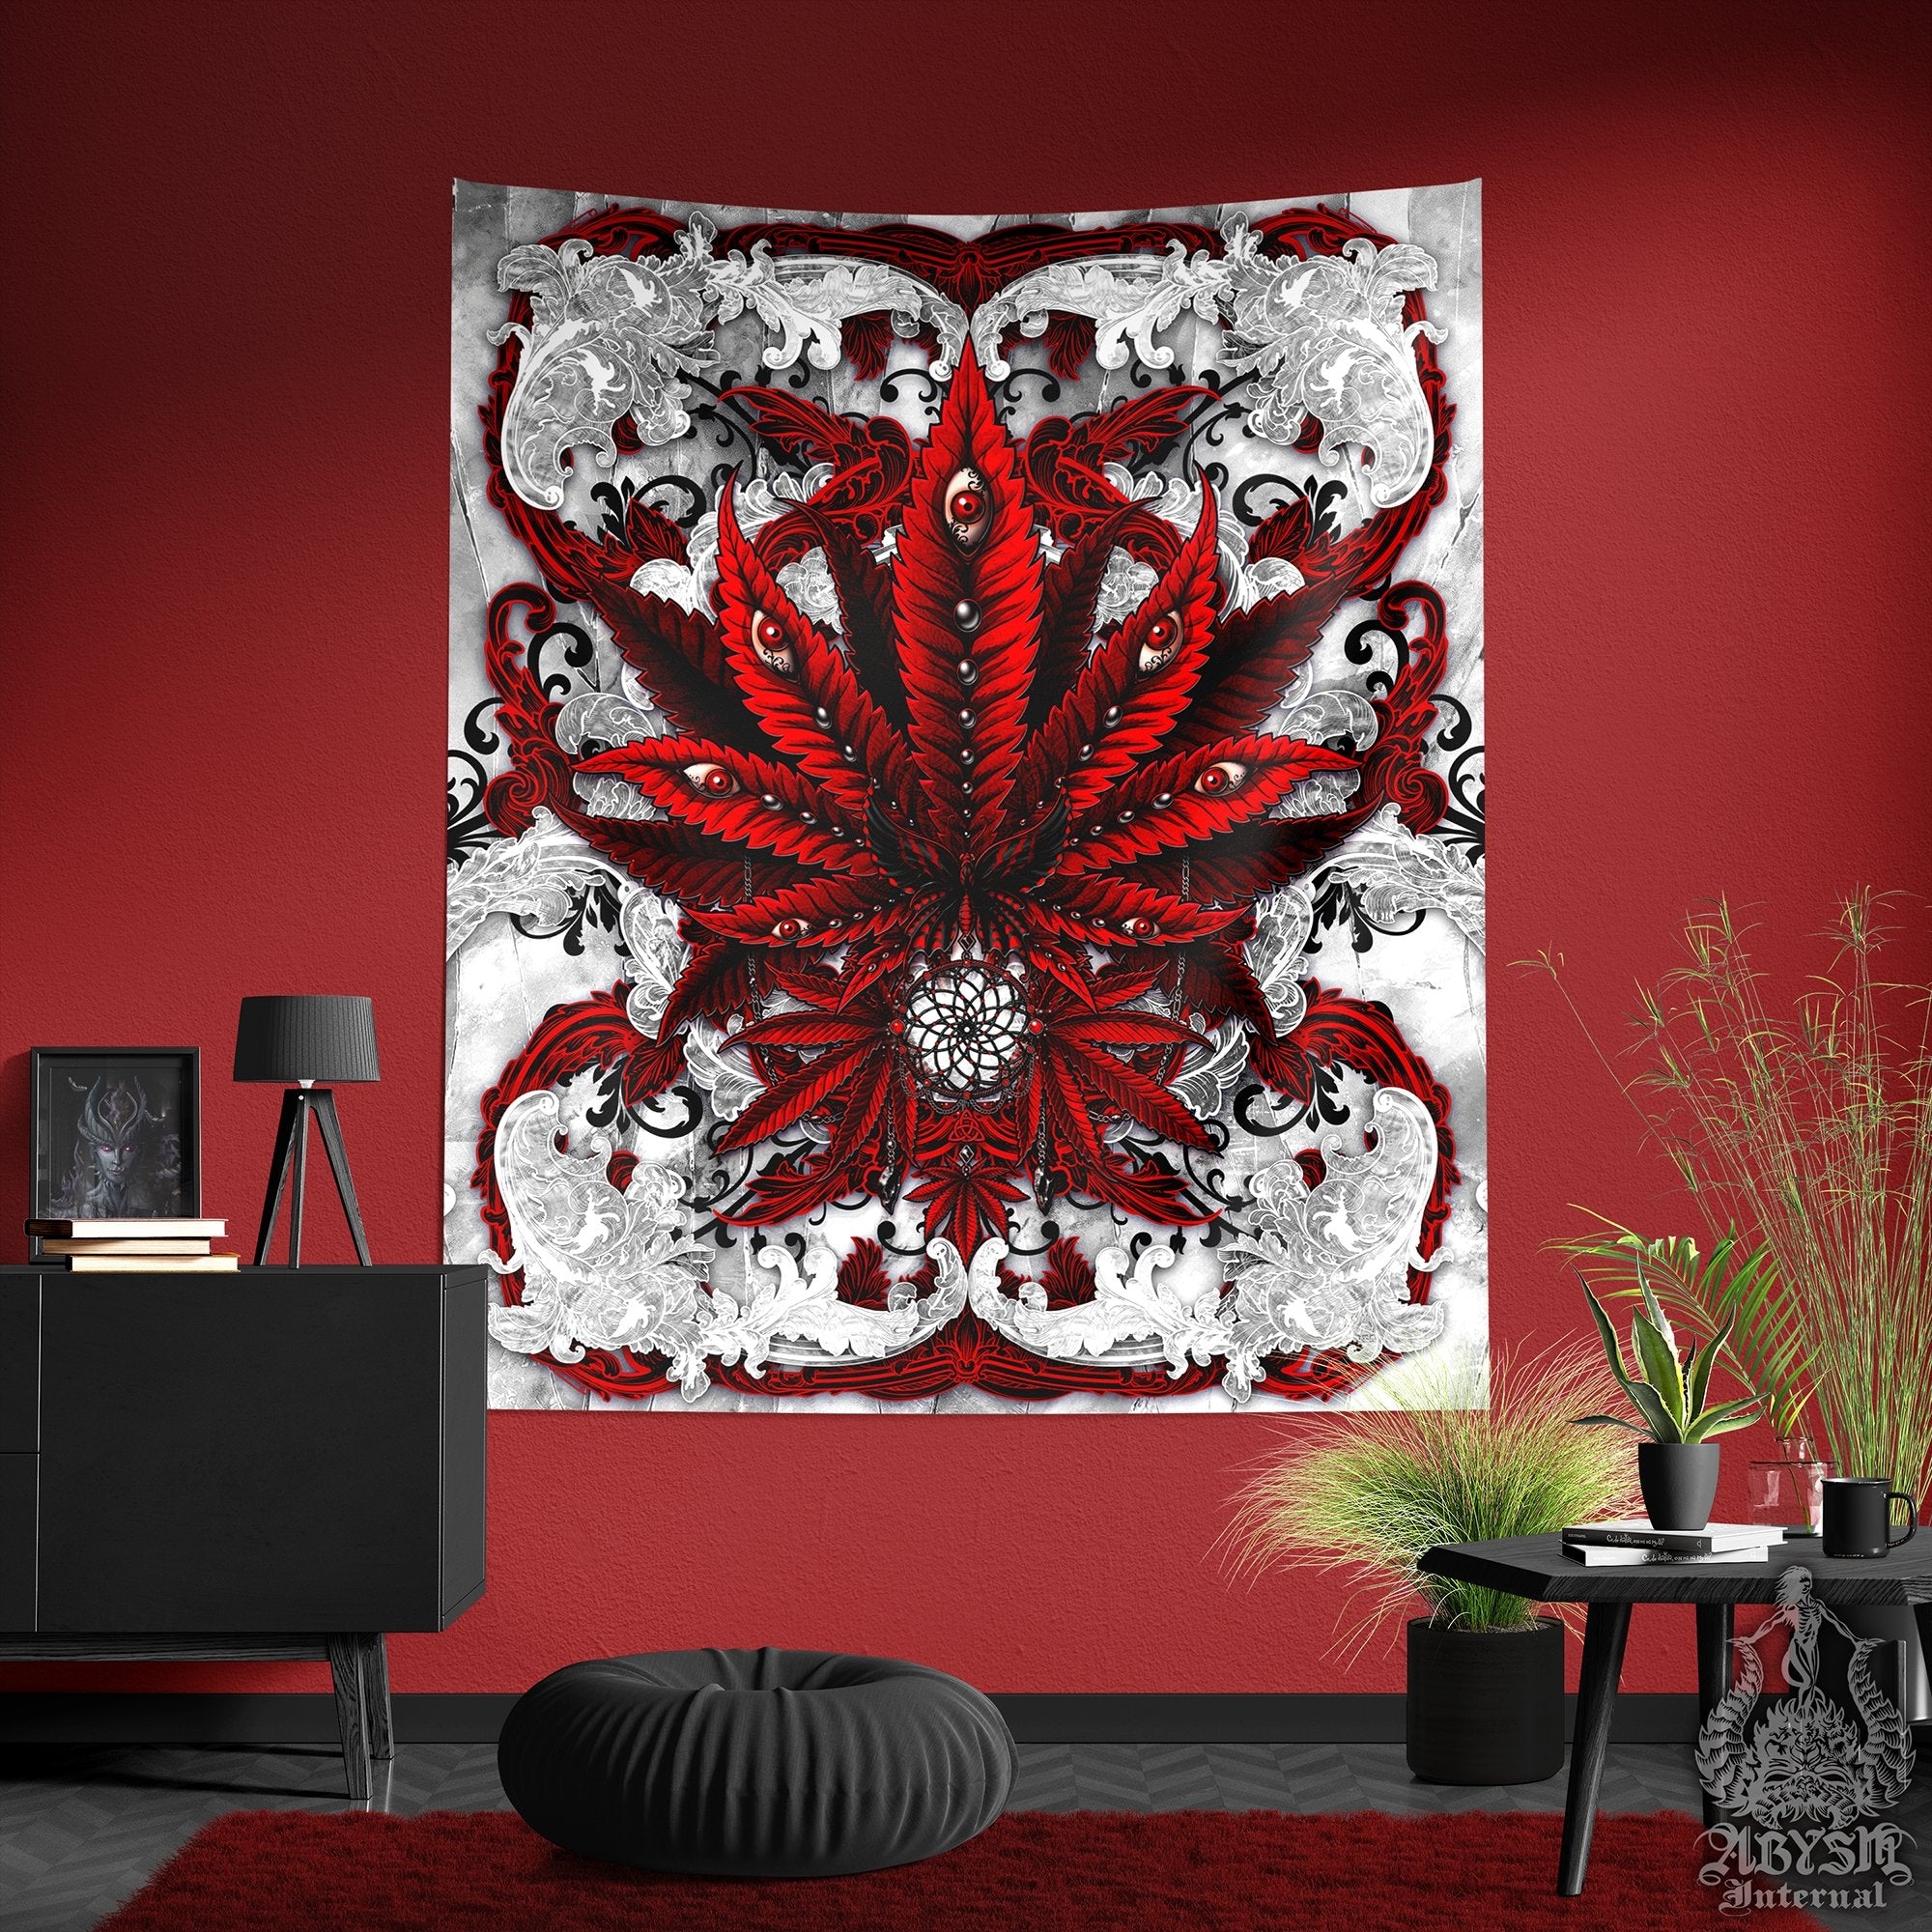 Weed Tapestry, Cannabis Shop Decor, Marijuana Wall Hanging, Gothic Home Decor, Bloody White Goth Art Print, 420 Gift - Abysm Internal